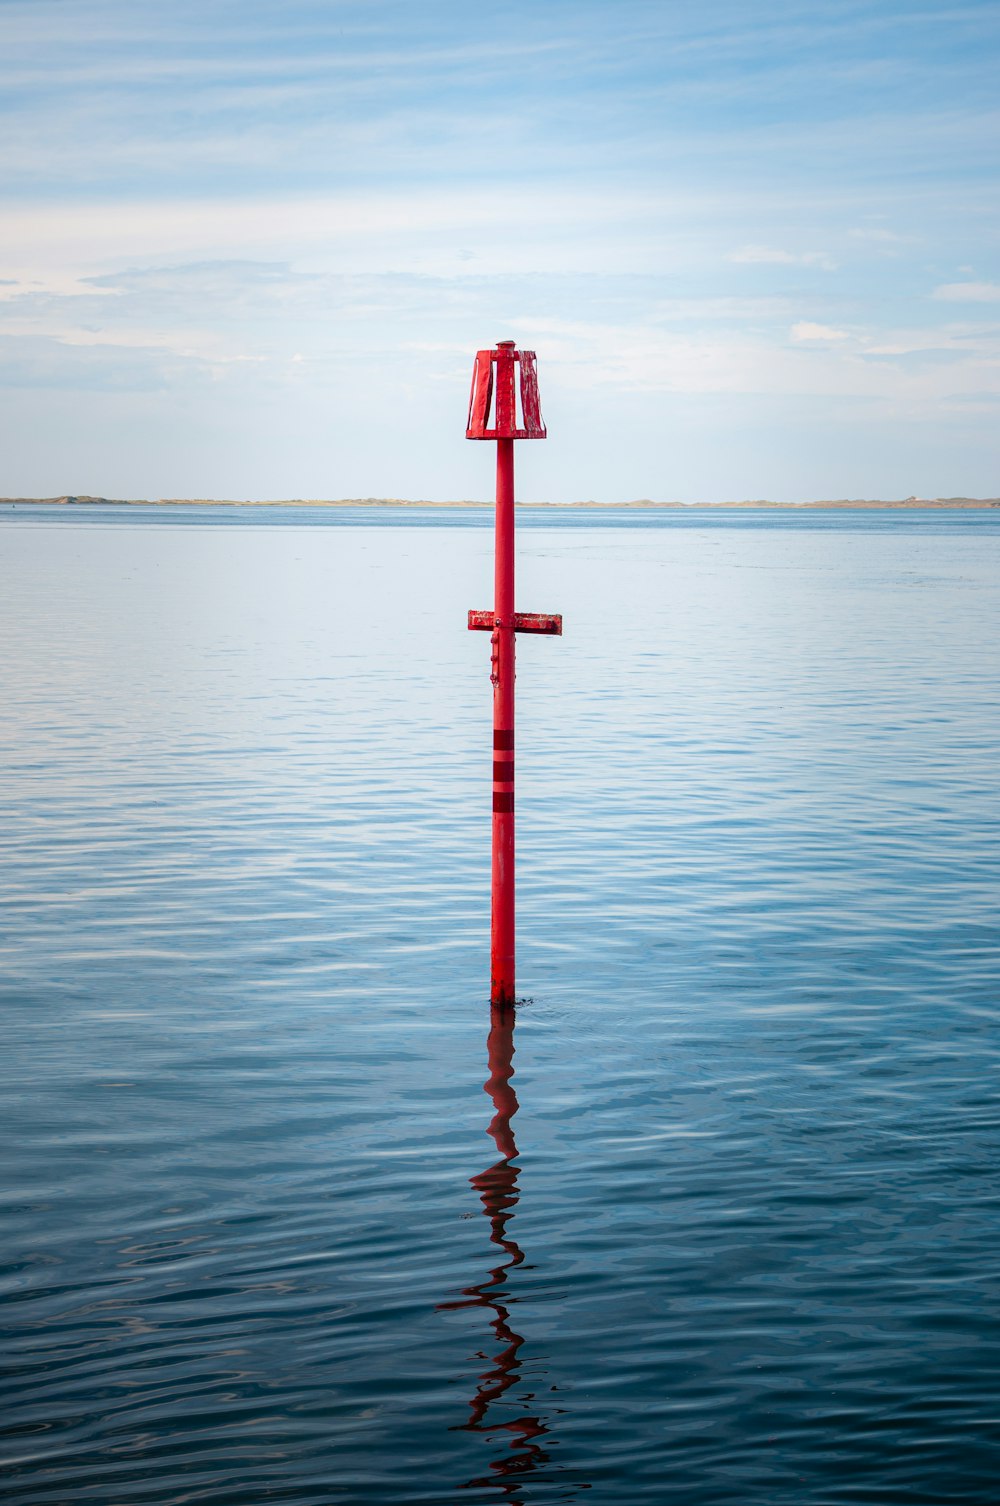 a red pole in the middle of a body of water